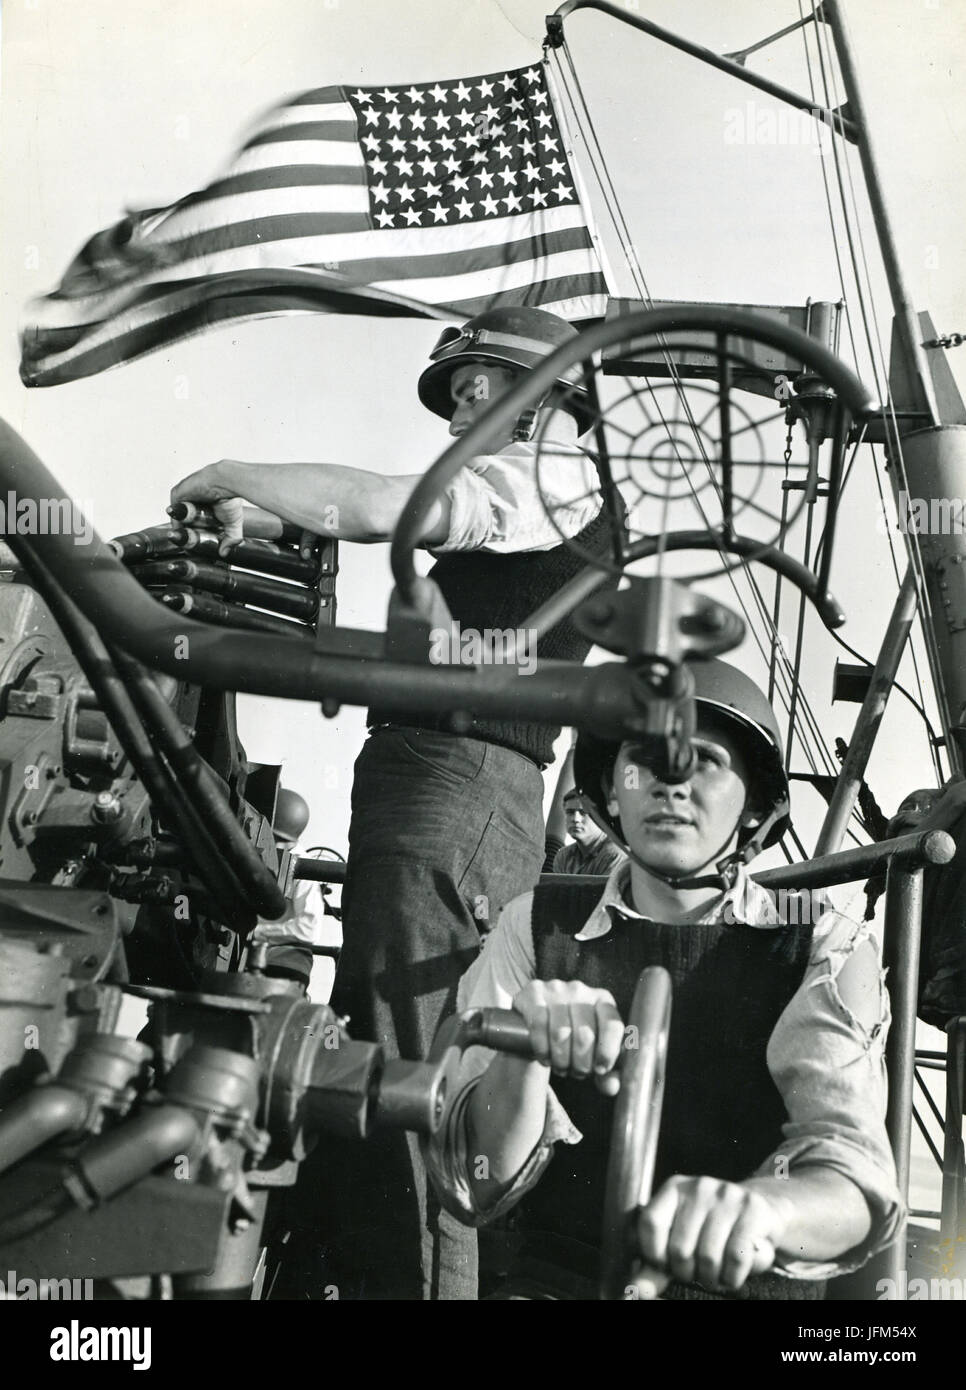 July 28, 1943 - The Stars and Stripes wave triumphantly as a trainer and loader aboard an American cruiser go methodically about their work during the bombardment which accompanied the invasion of Sicily. Stock Photo